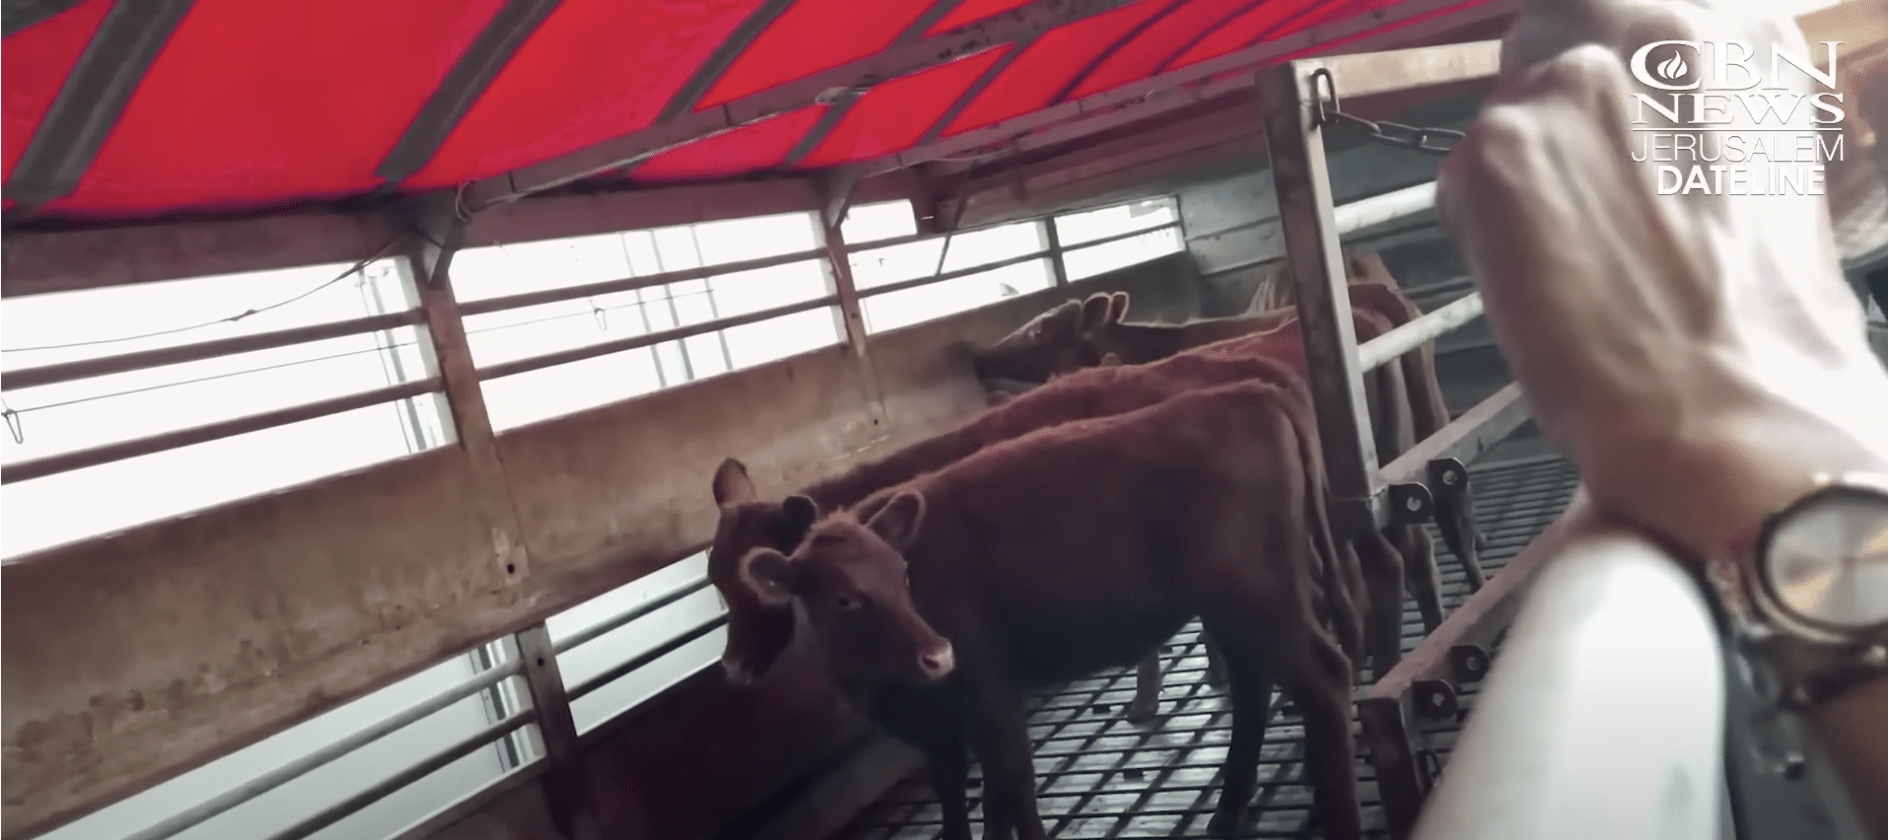 The next phase for the red heifers in preparation for coming third temple being prepared